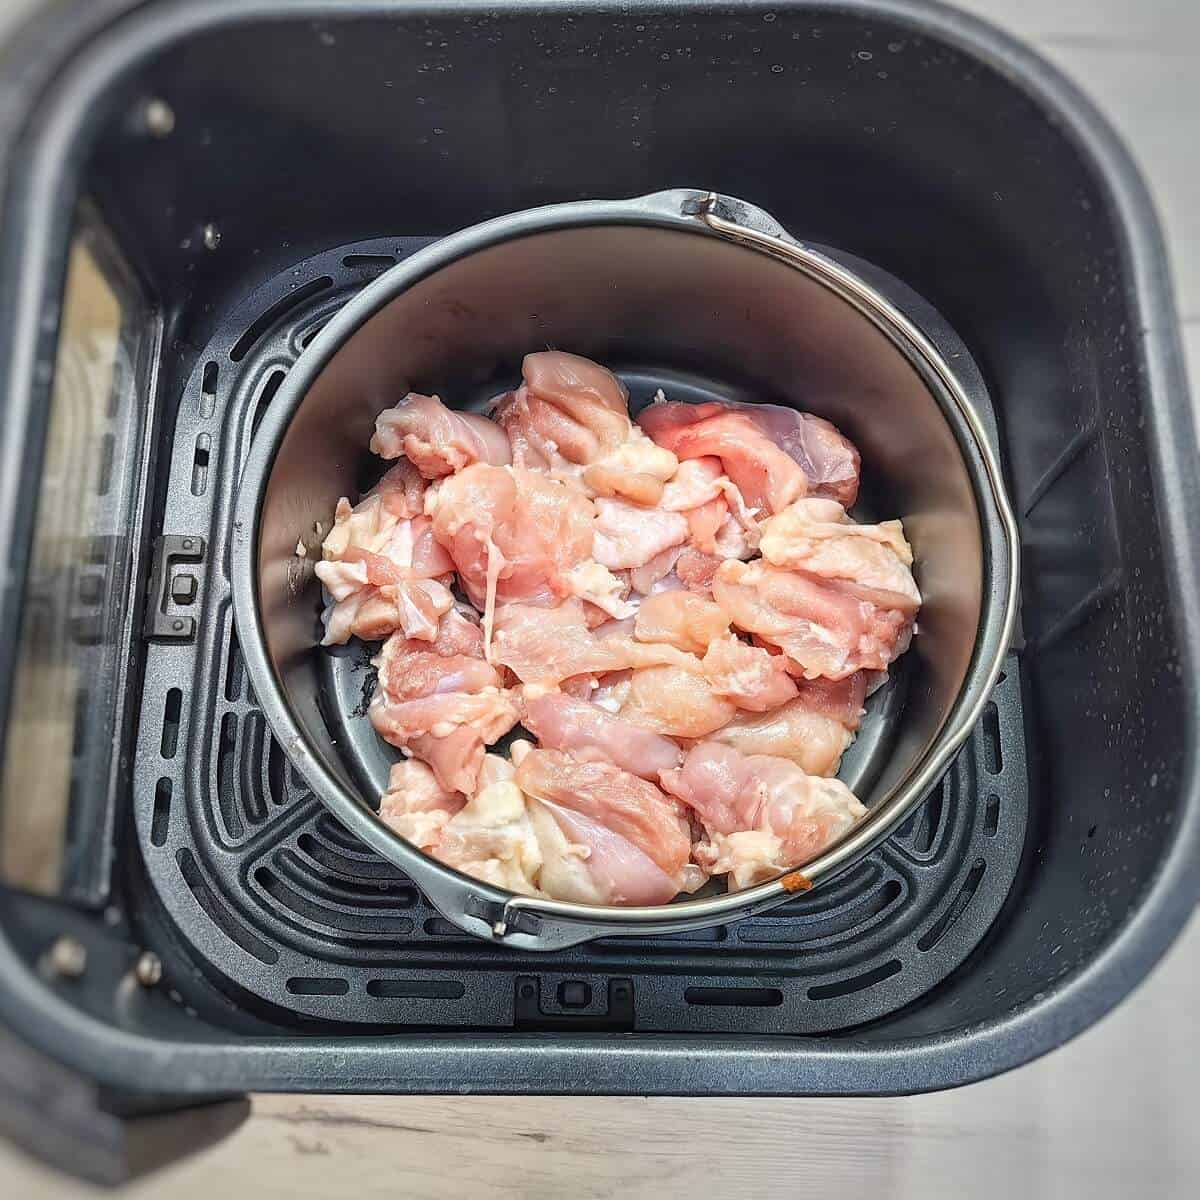 chicken in a metal container suitable inside air fryer